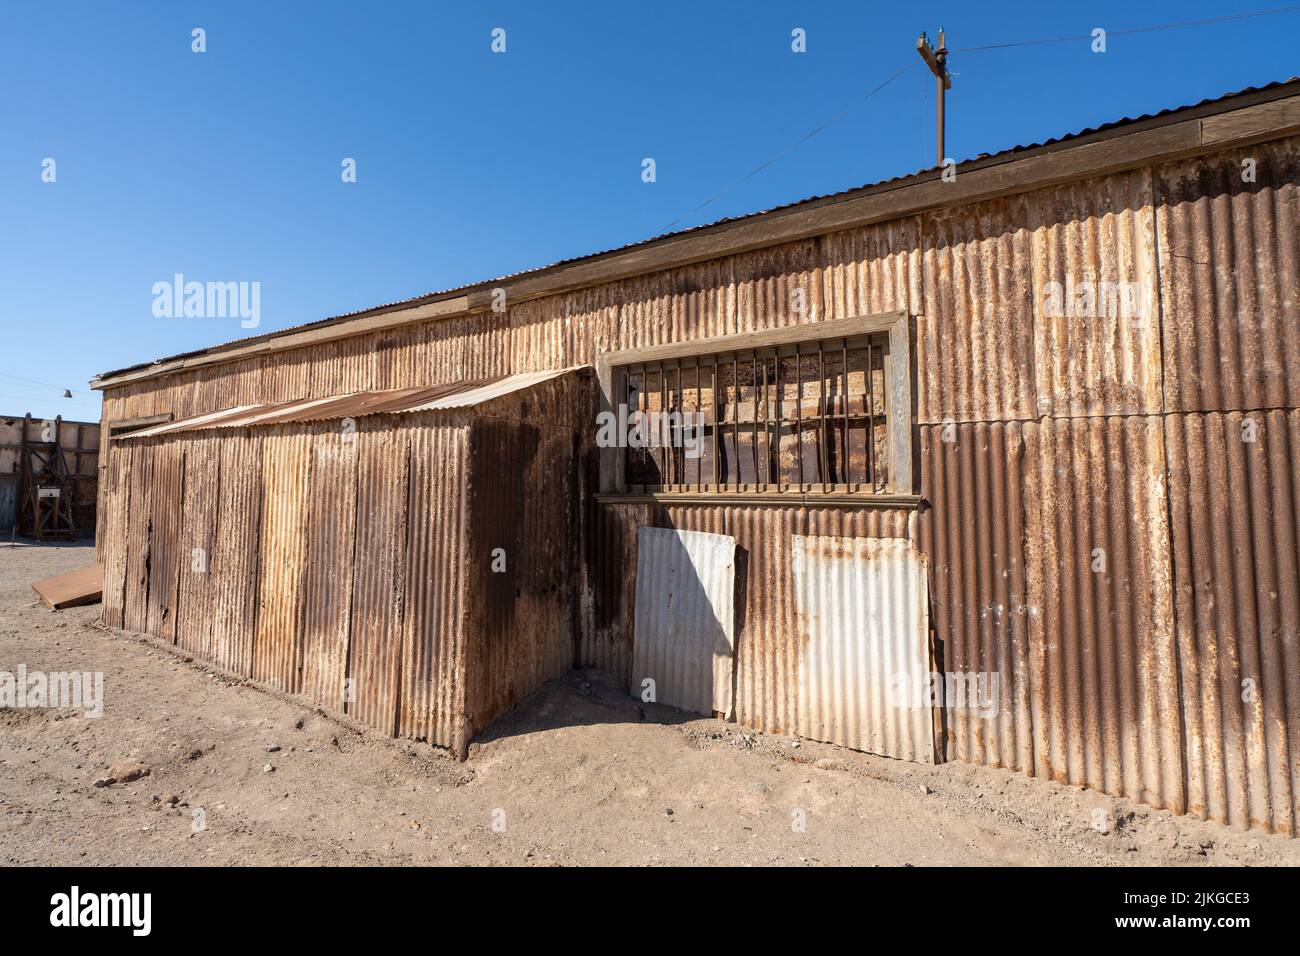 A rusty old workshop building in the outdoor museum of the saltpeter works at Humberstone, Chile. Stock Photo